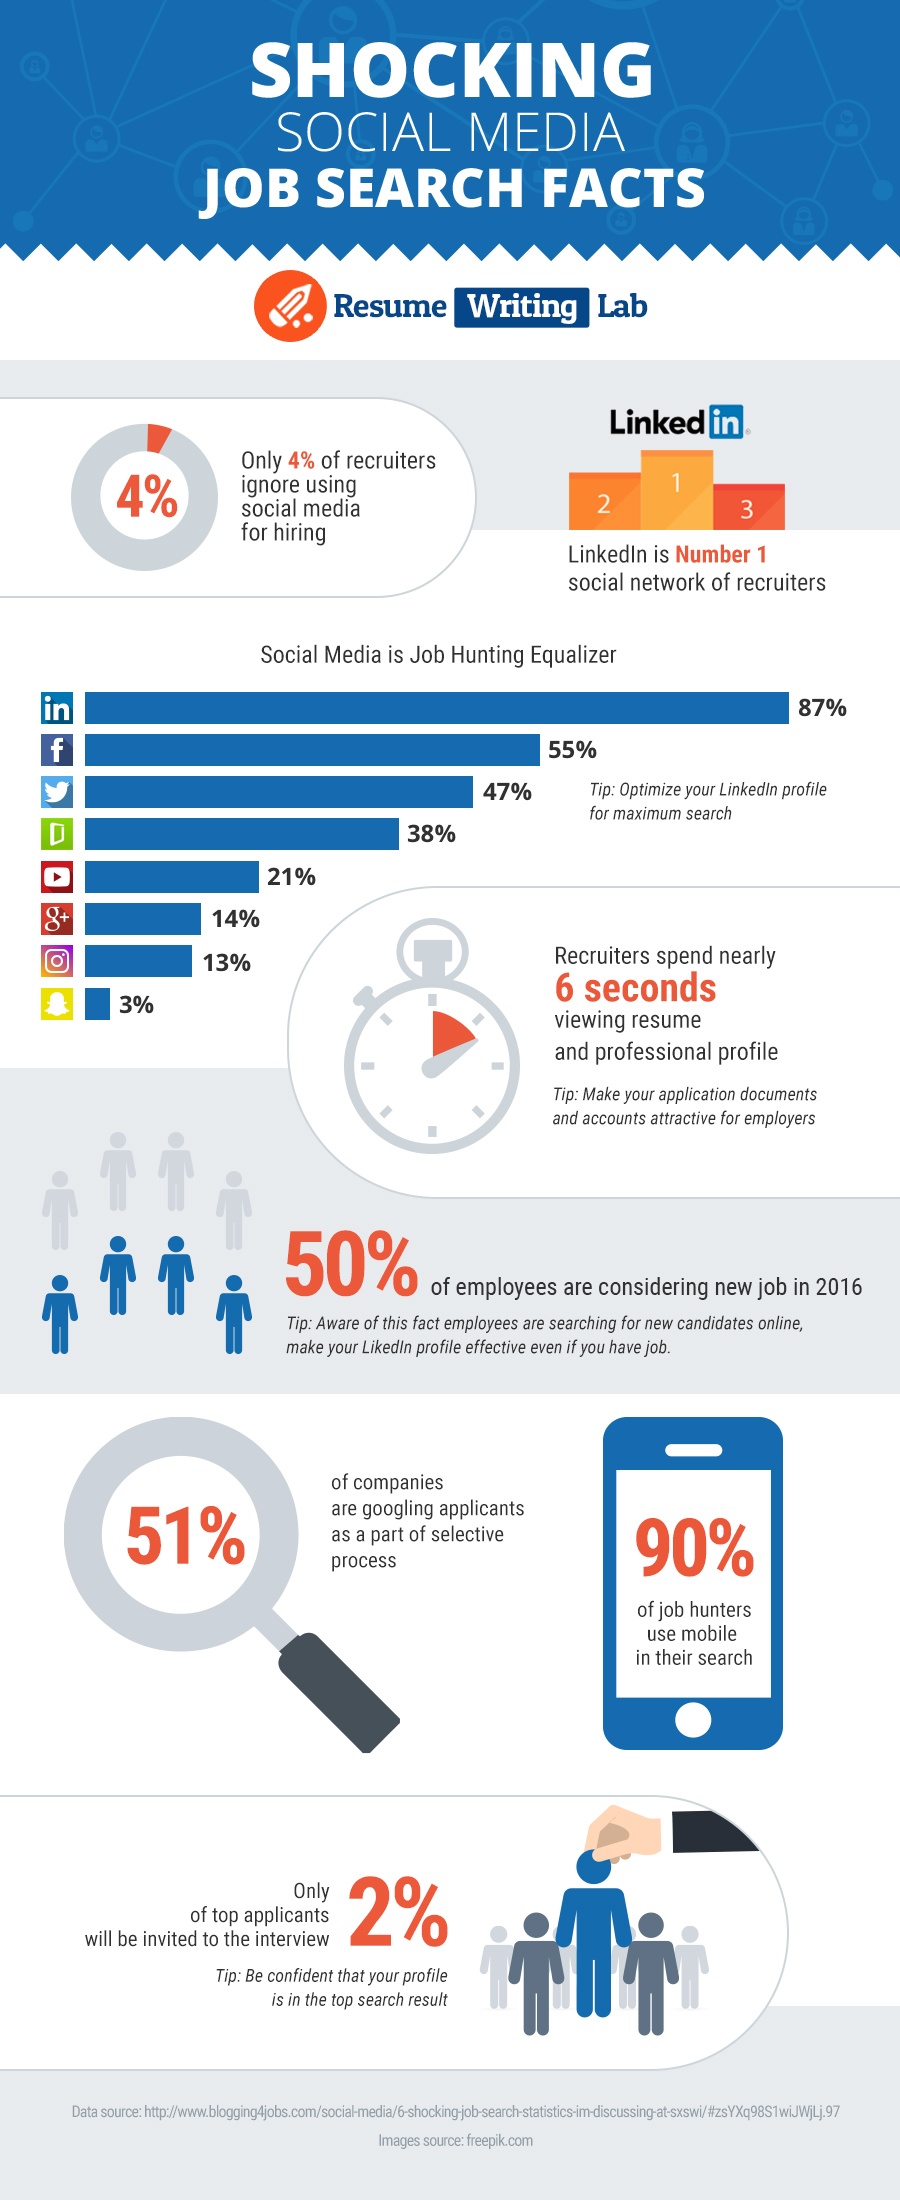 job search facts and social media